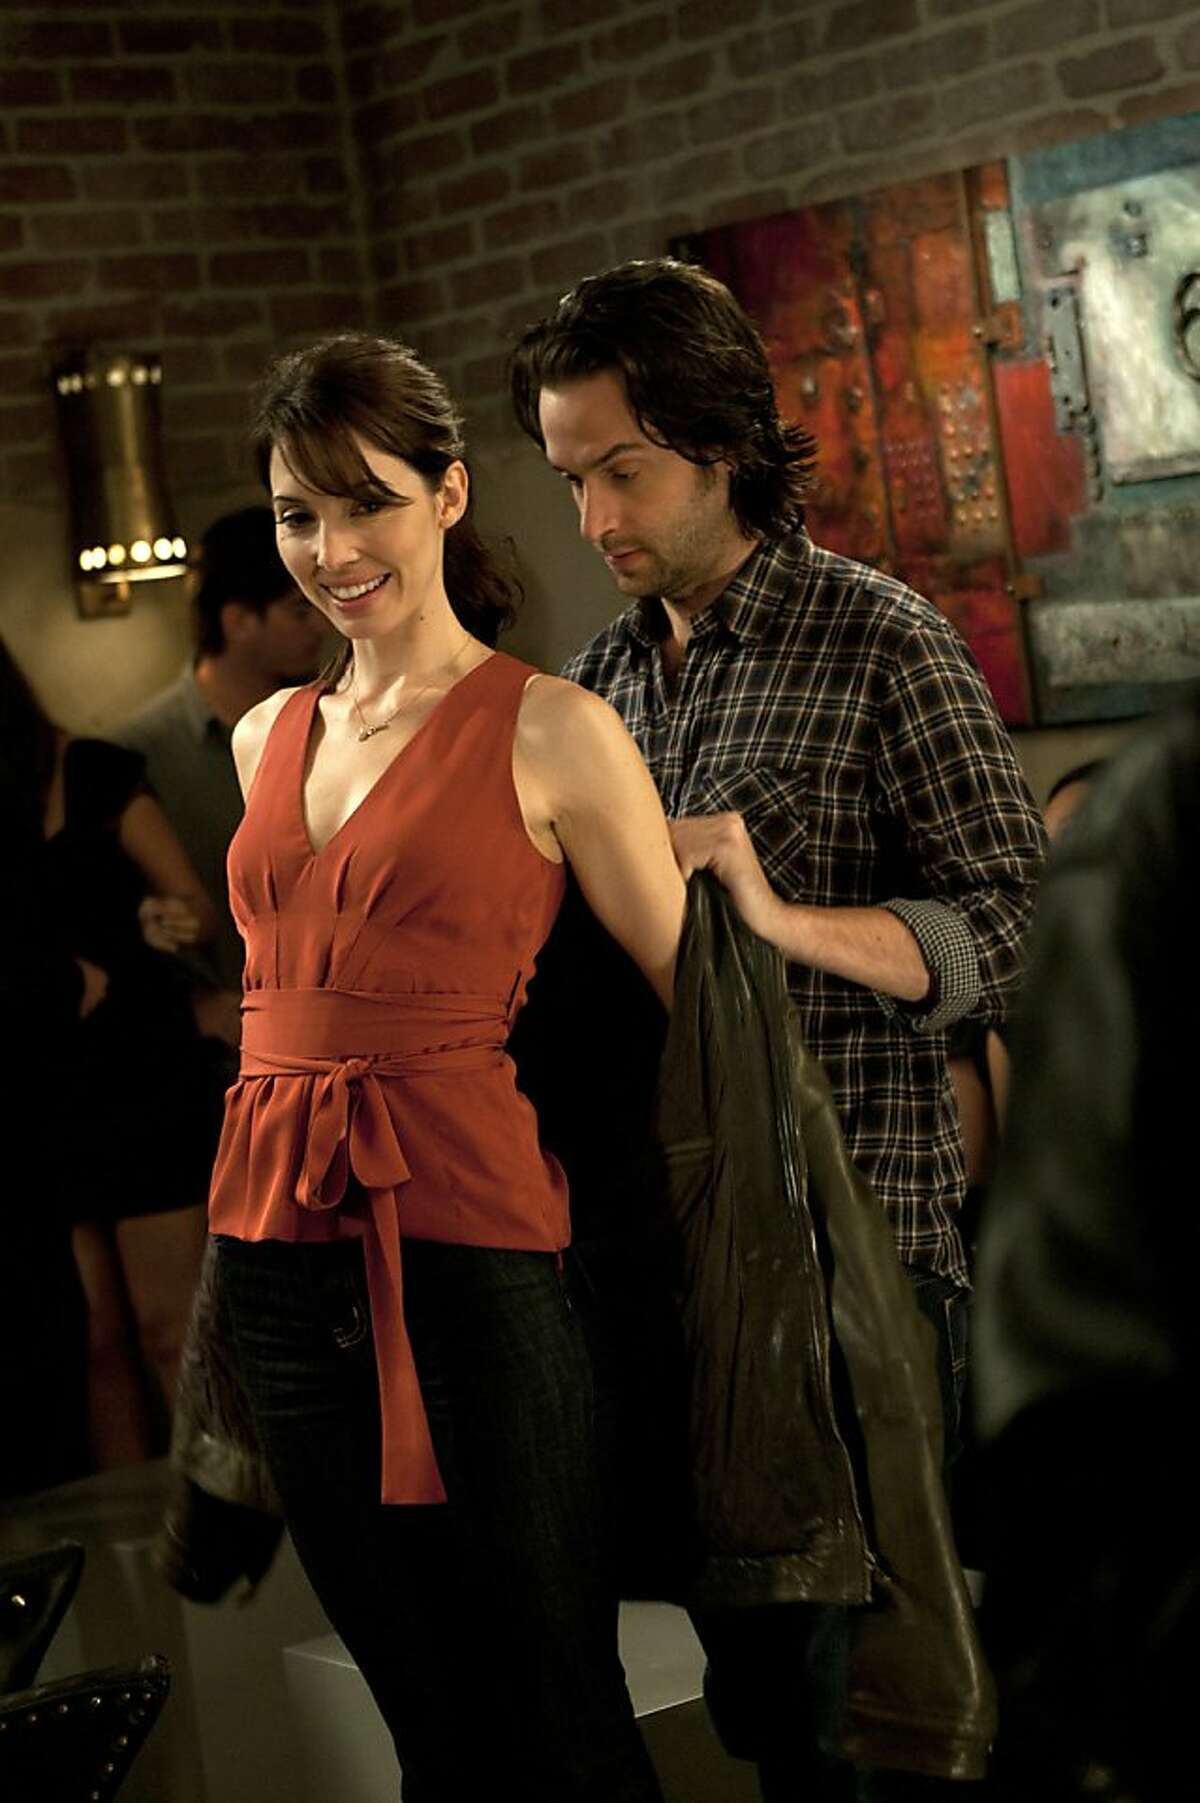 WHITNEY -- "First Date" Episode 102 -- Pictured: (l-r) Whitney Cummings as Whitney, Chris D'Elia as Alex.